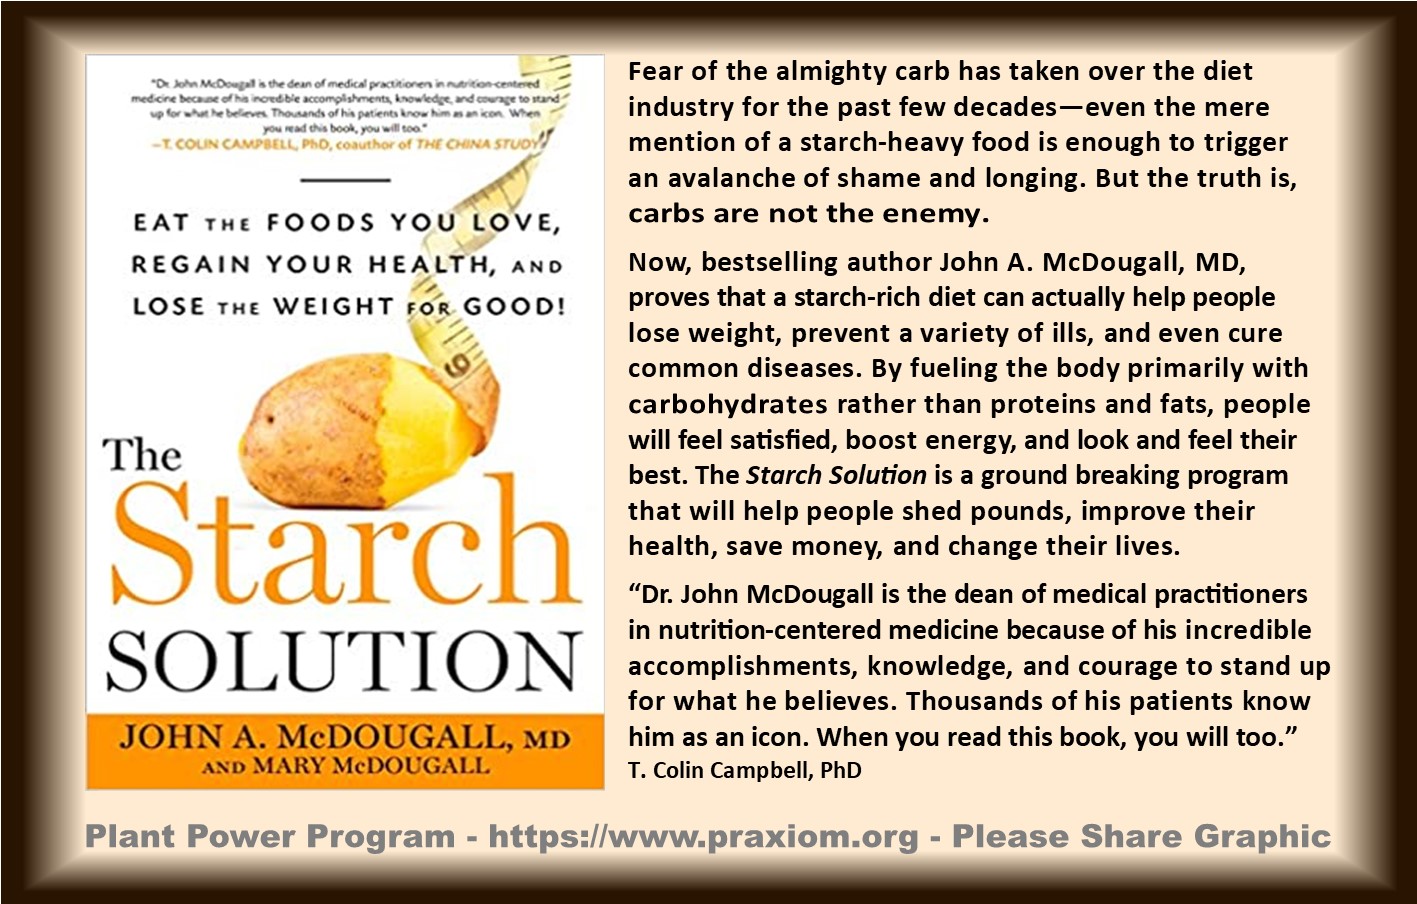 The Starch Solution
        by Dr. John McDougall